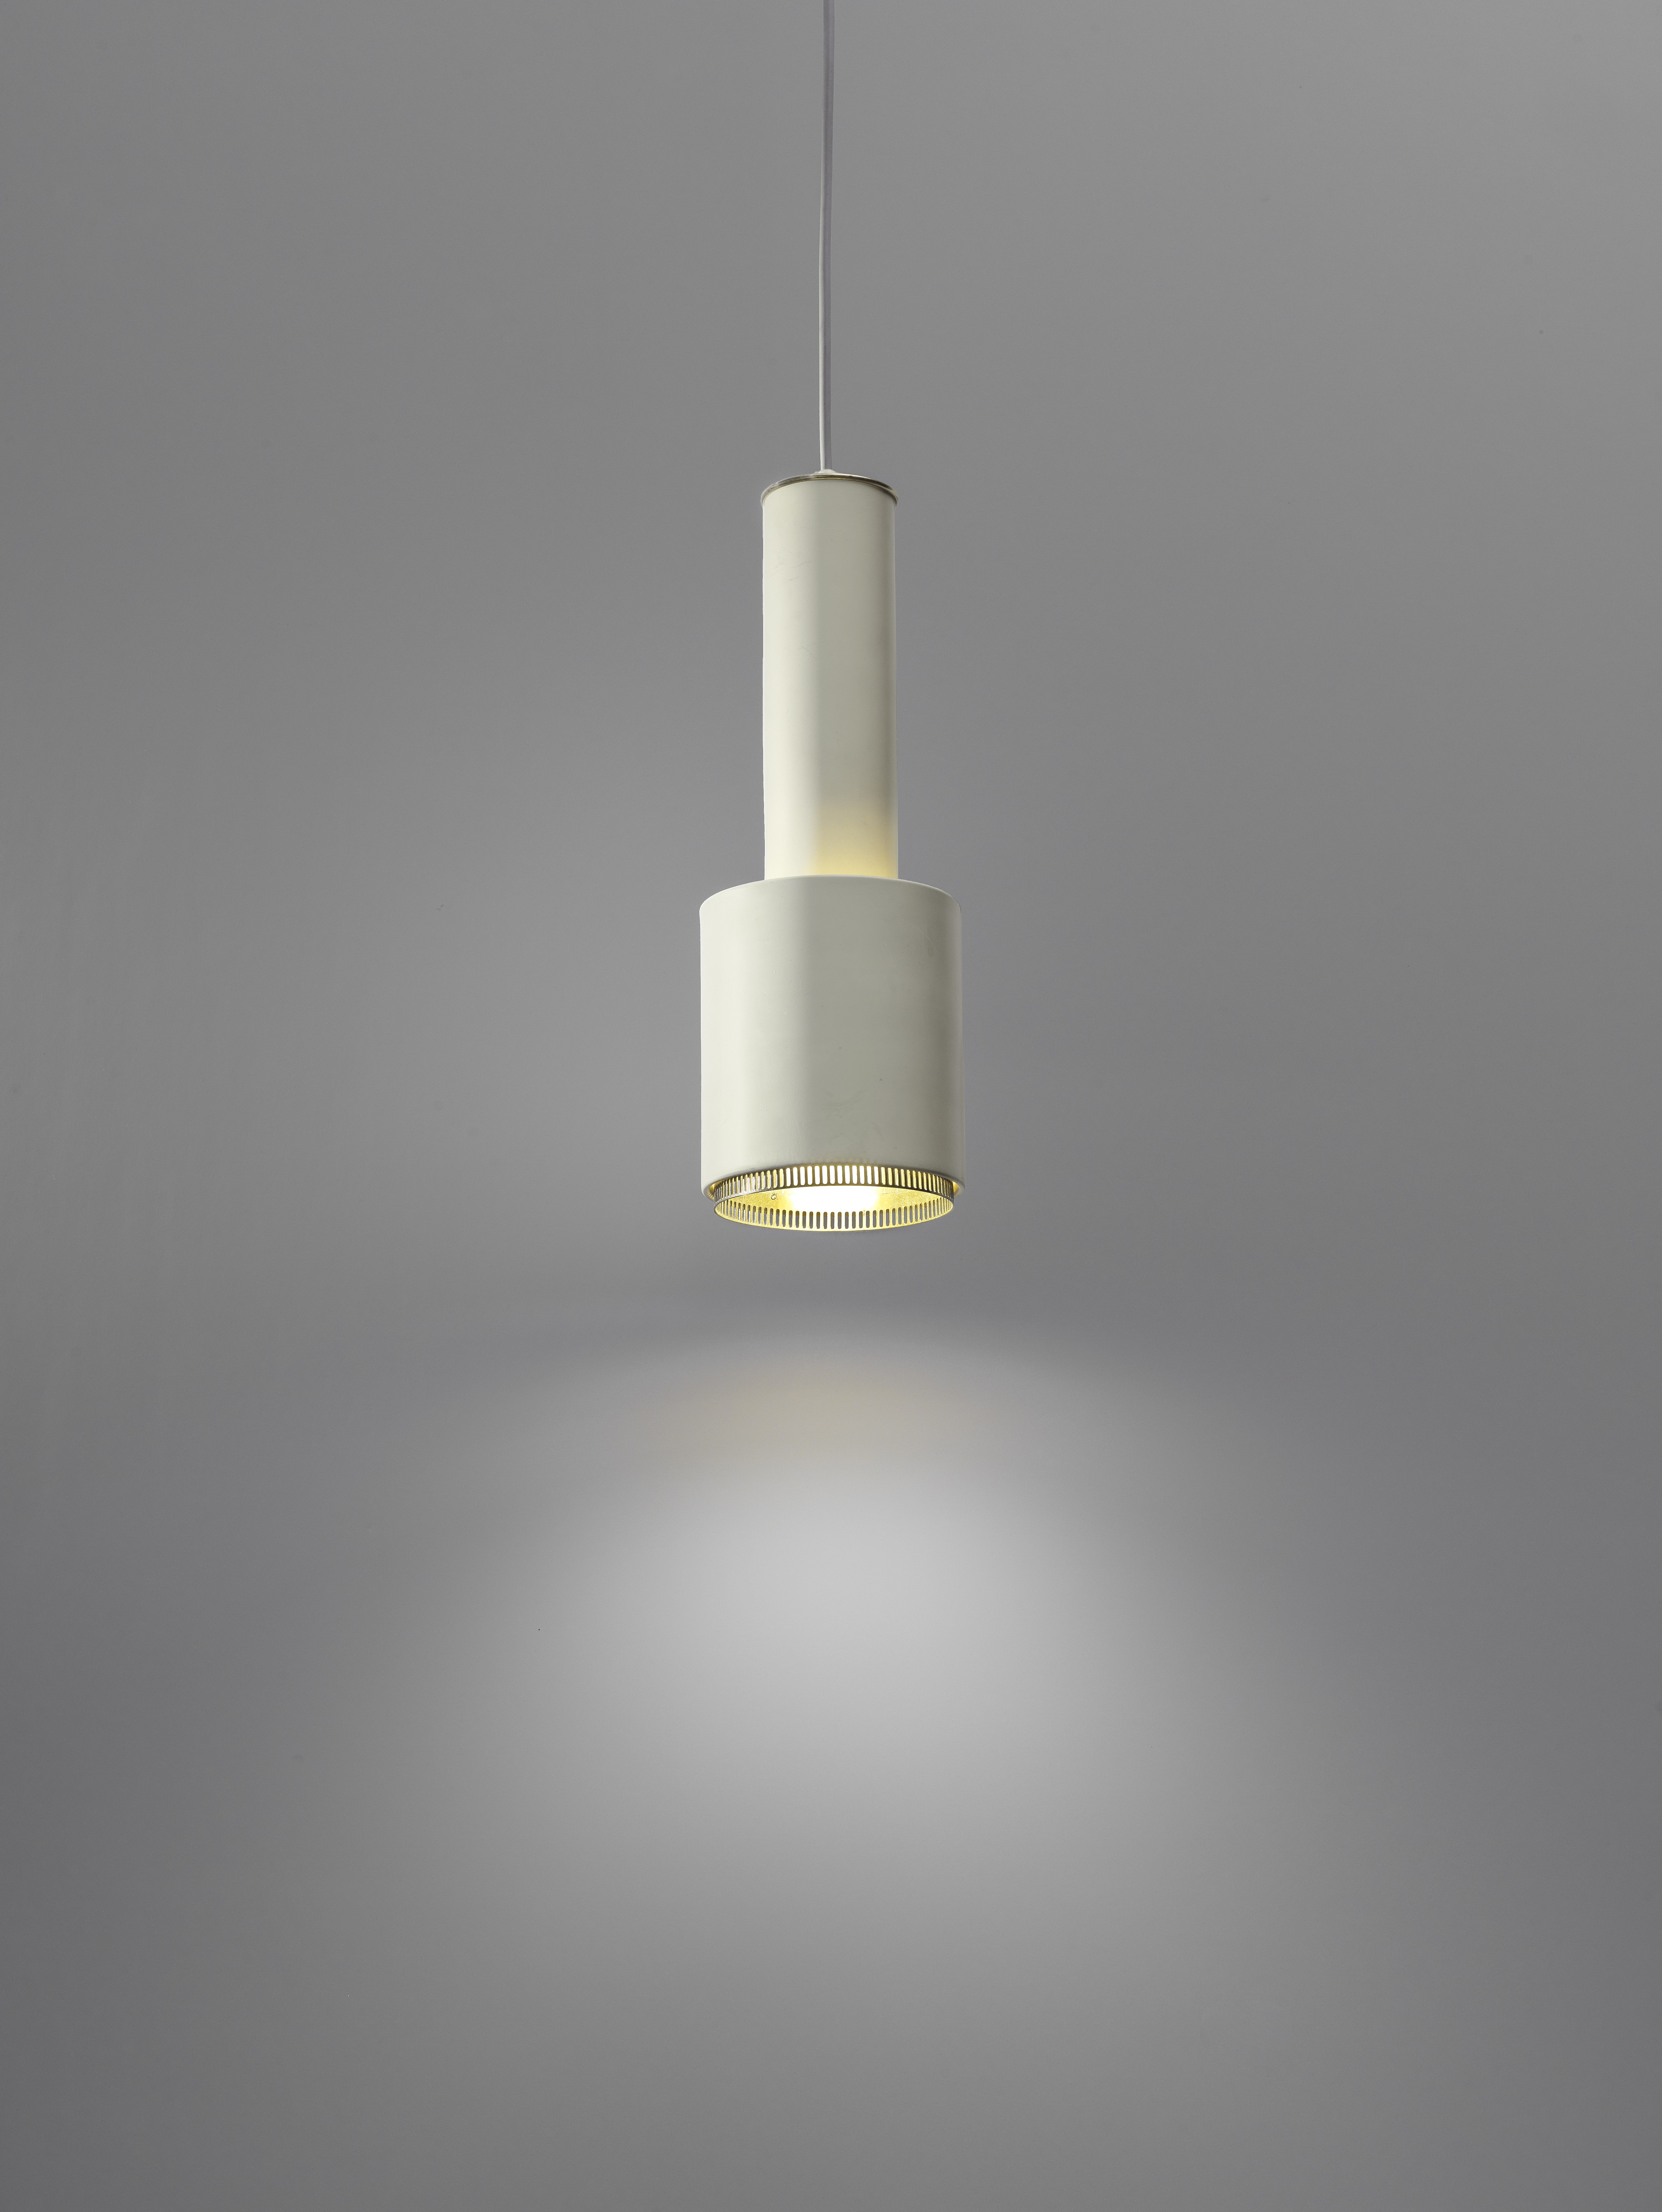 Alvar Aalto 'Hand Grenade' ceiling light, model no. A110, designed for the Finnish Engineers' As...